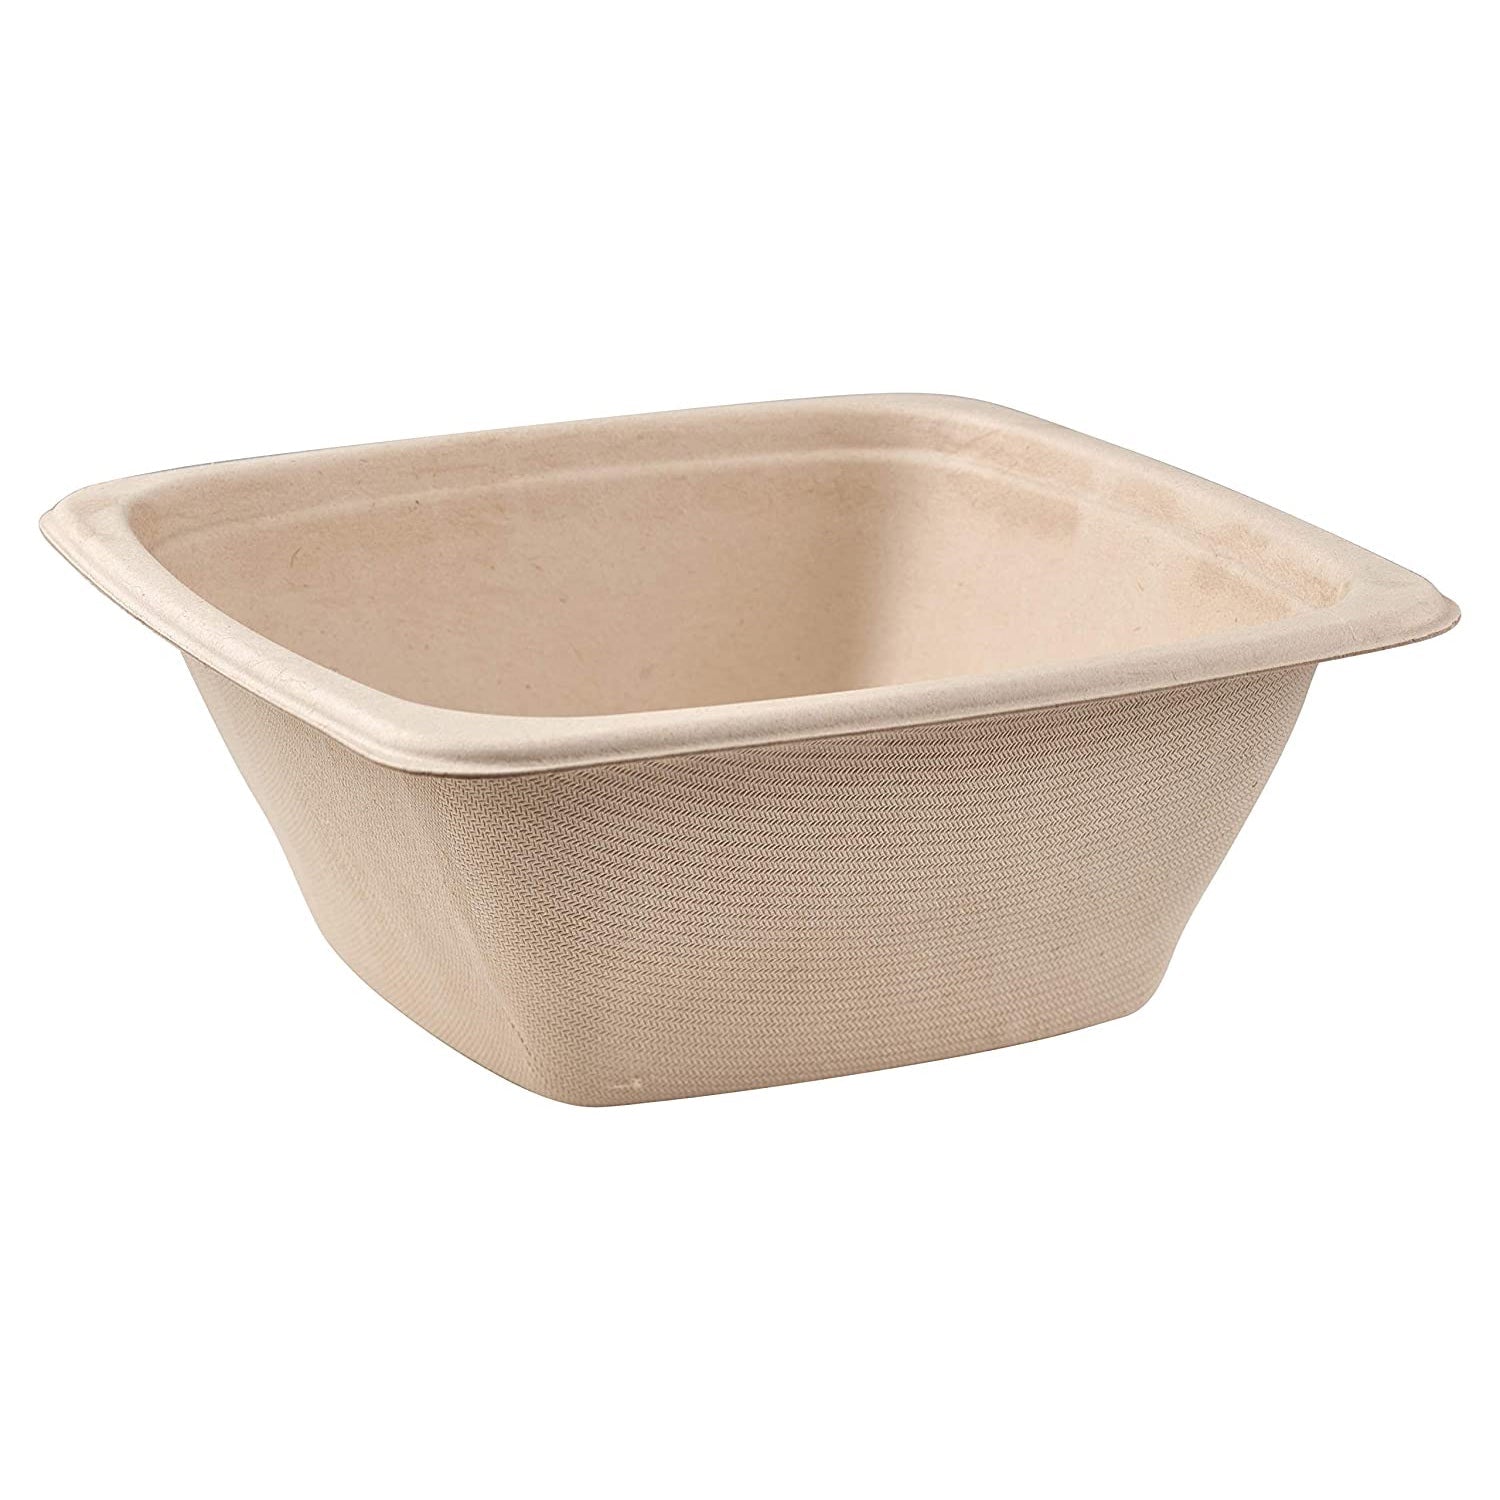 32oz Eco Friendly Disposable Square Bowls Compostable Container with Dome Lids